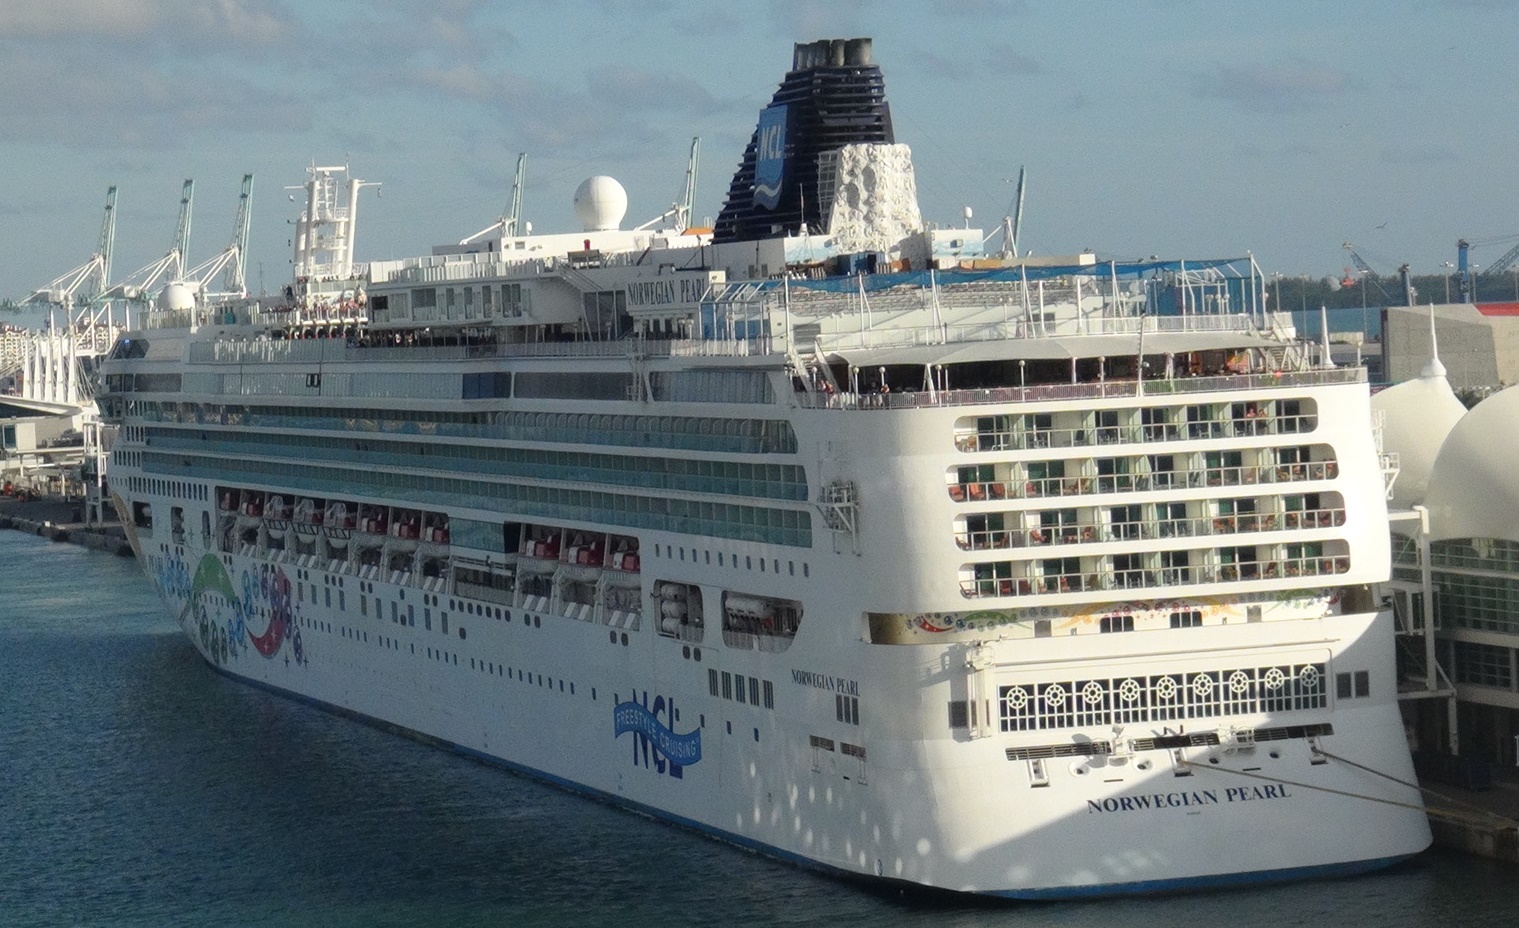 About The Norwegian Jewel Cruise Ship